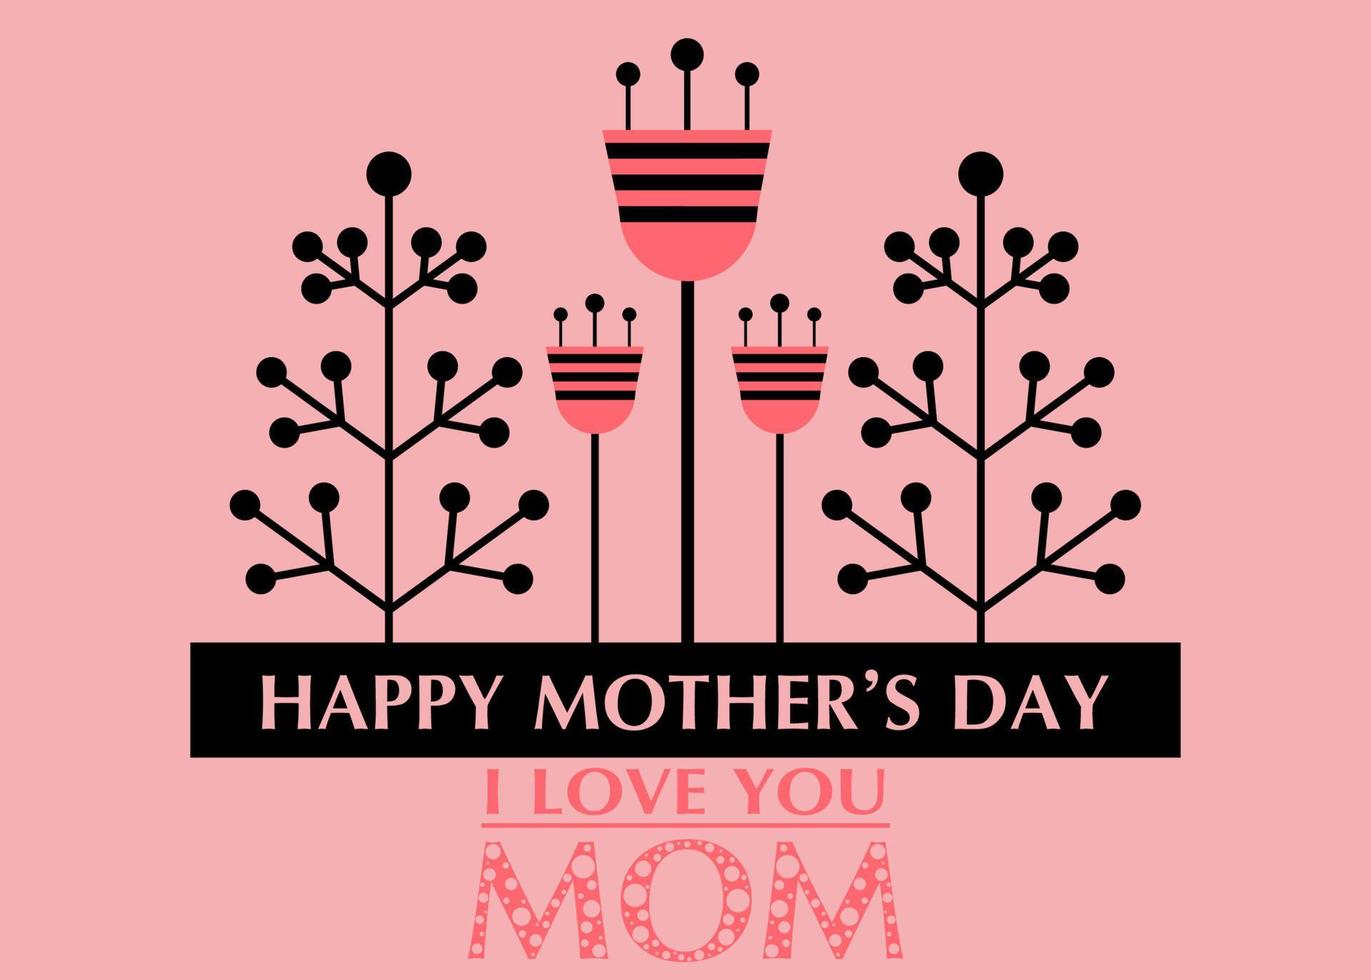 Mothers day greeting card with minimalistic style flowers vector isolated illustration